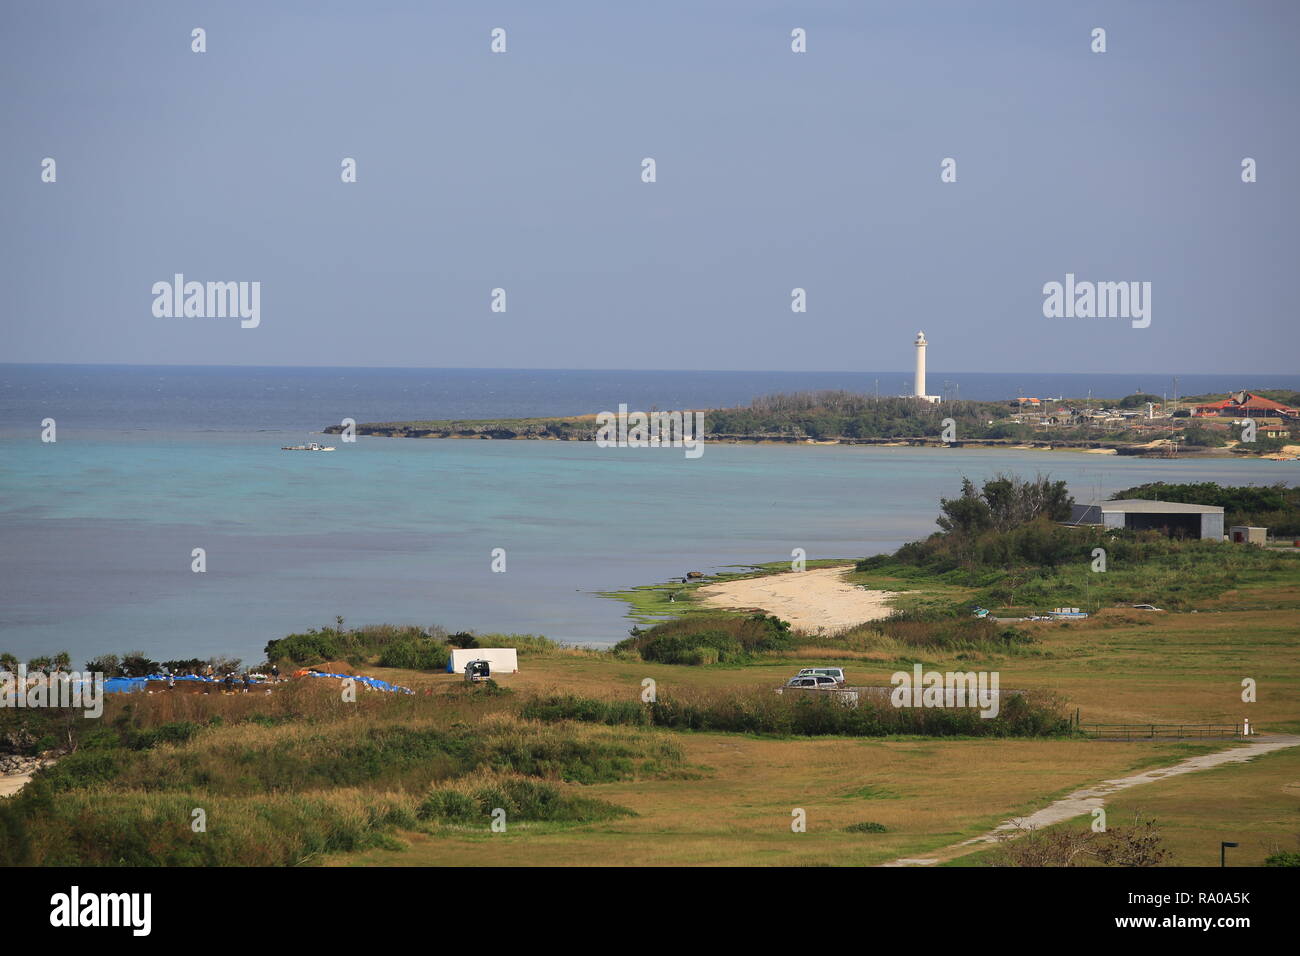 okinawa seaview with the skyline and lighthouse Stock Photo